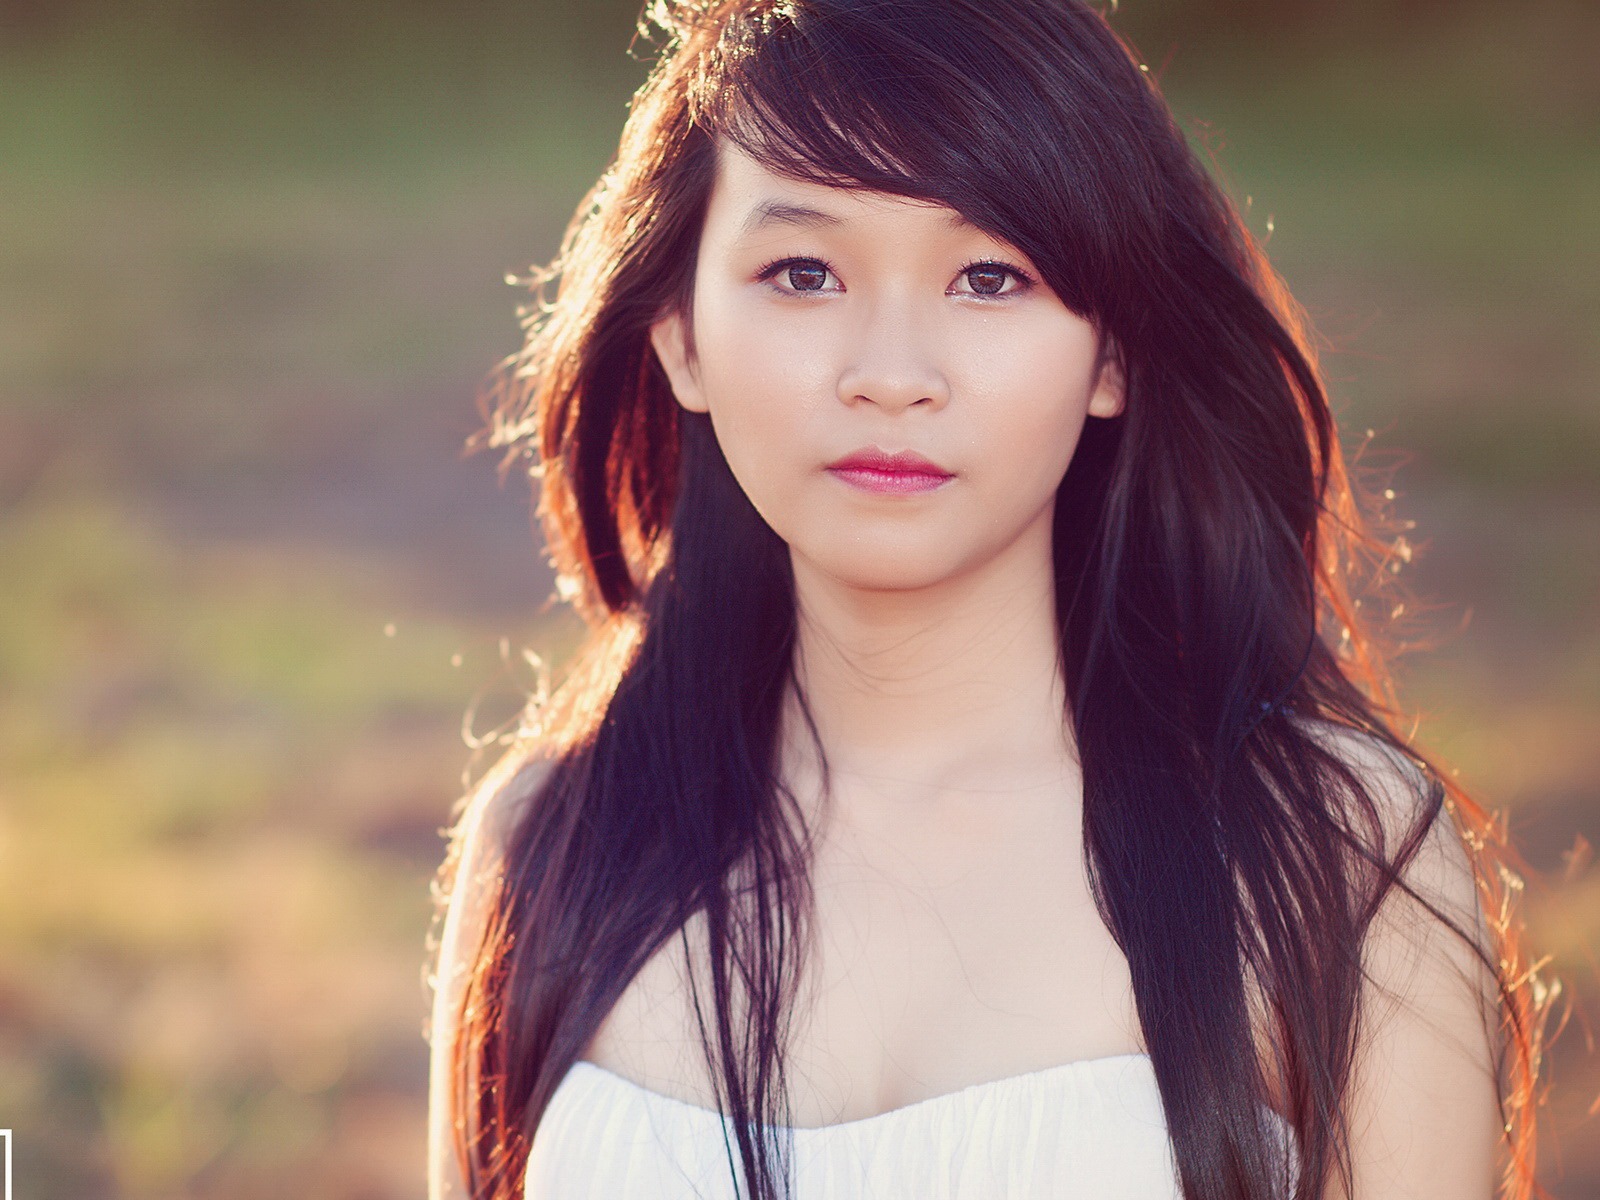 Pure and lovely young Asian girl HD wallpapers collection (4) #25 - 1600x1200